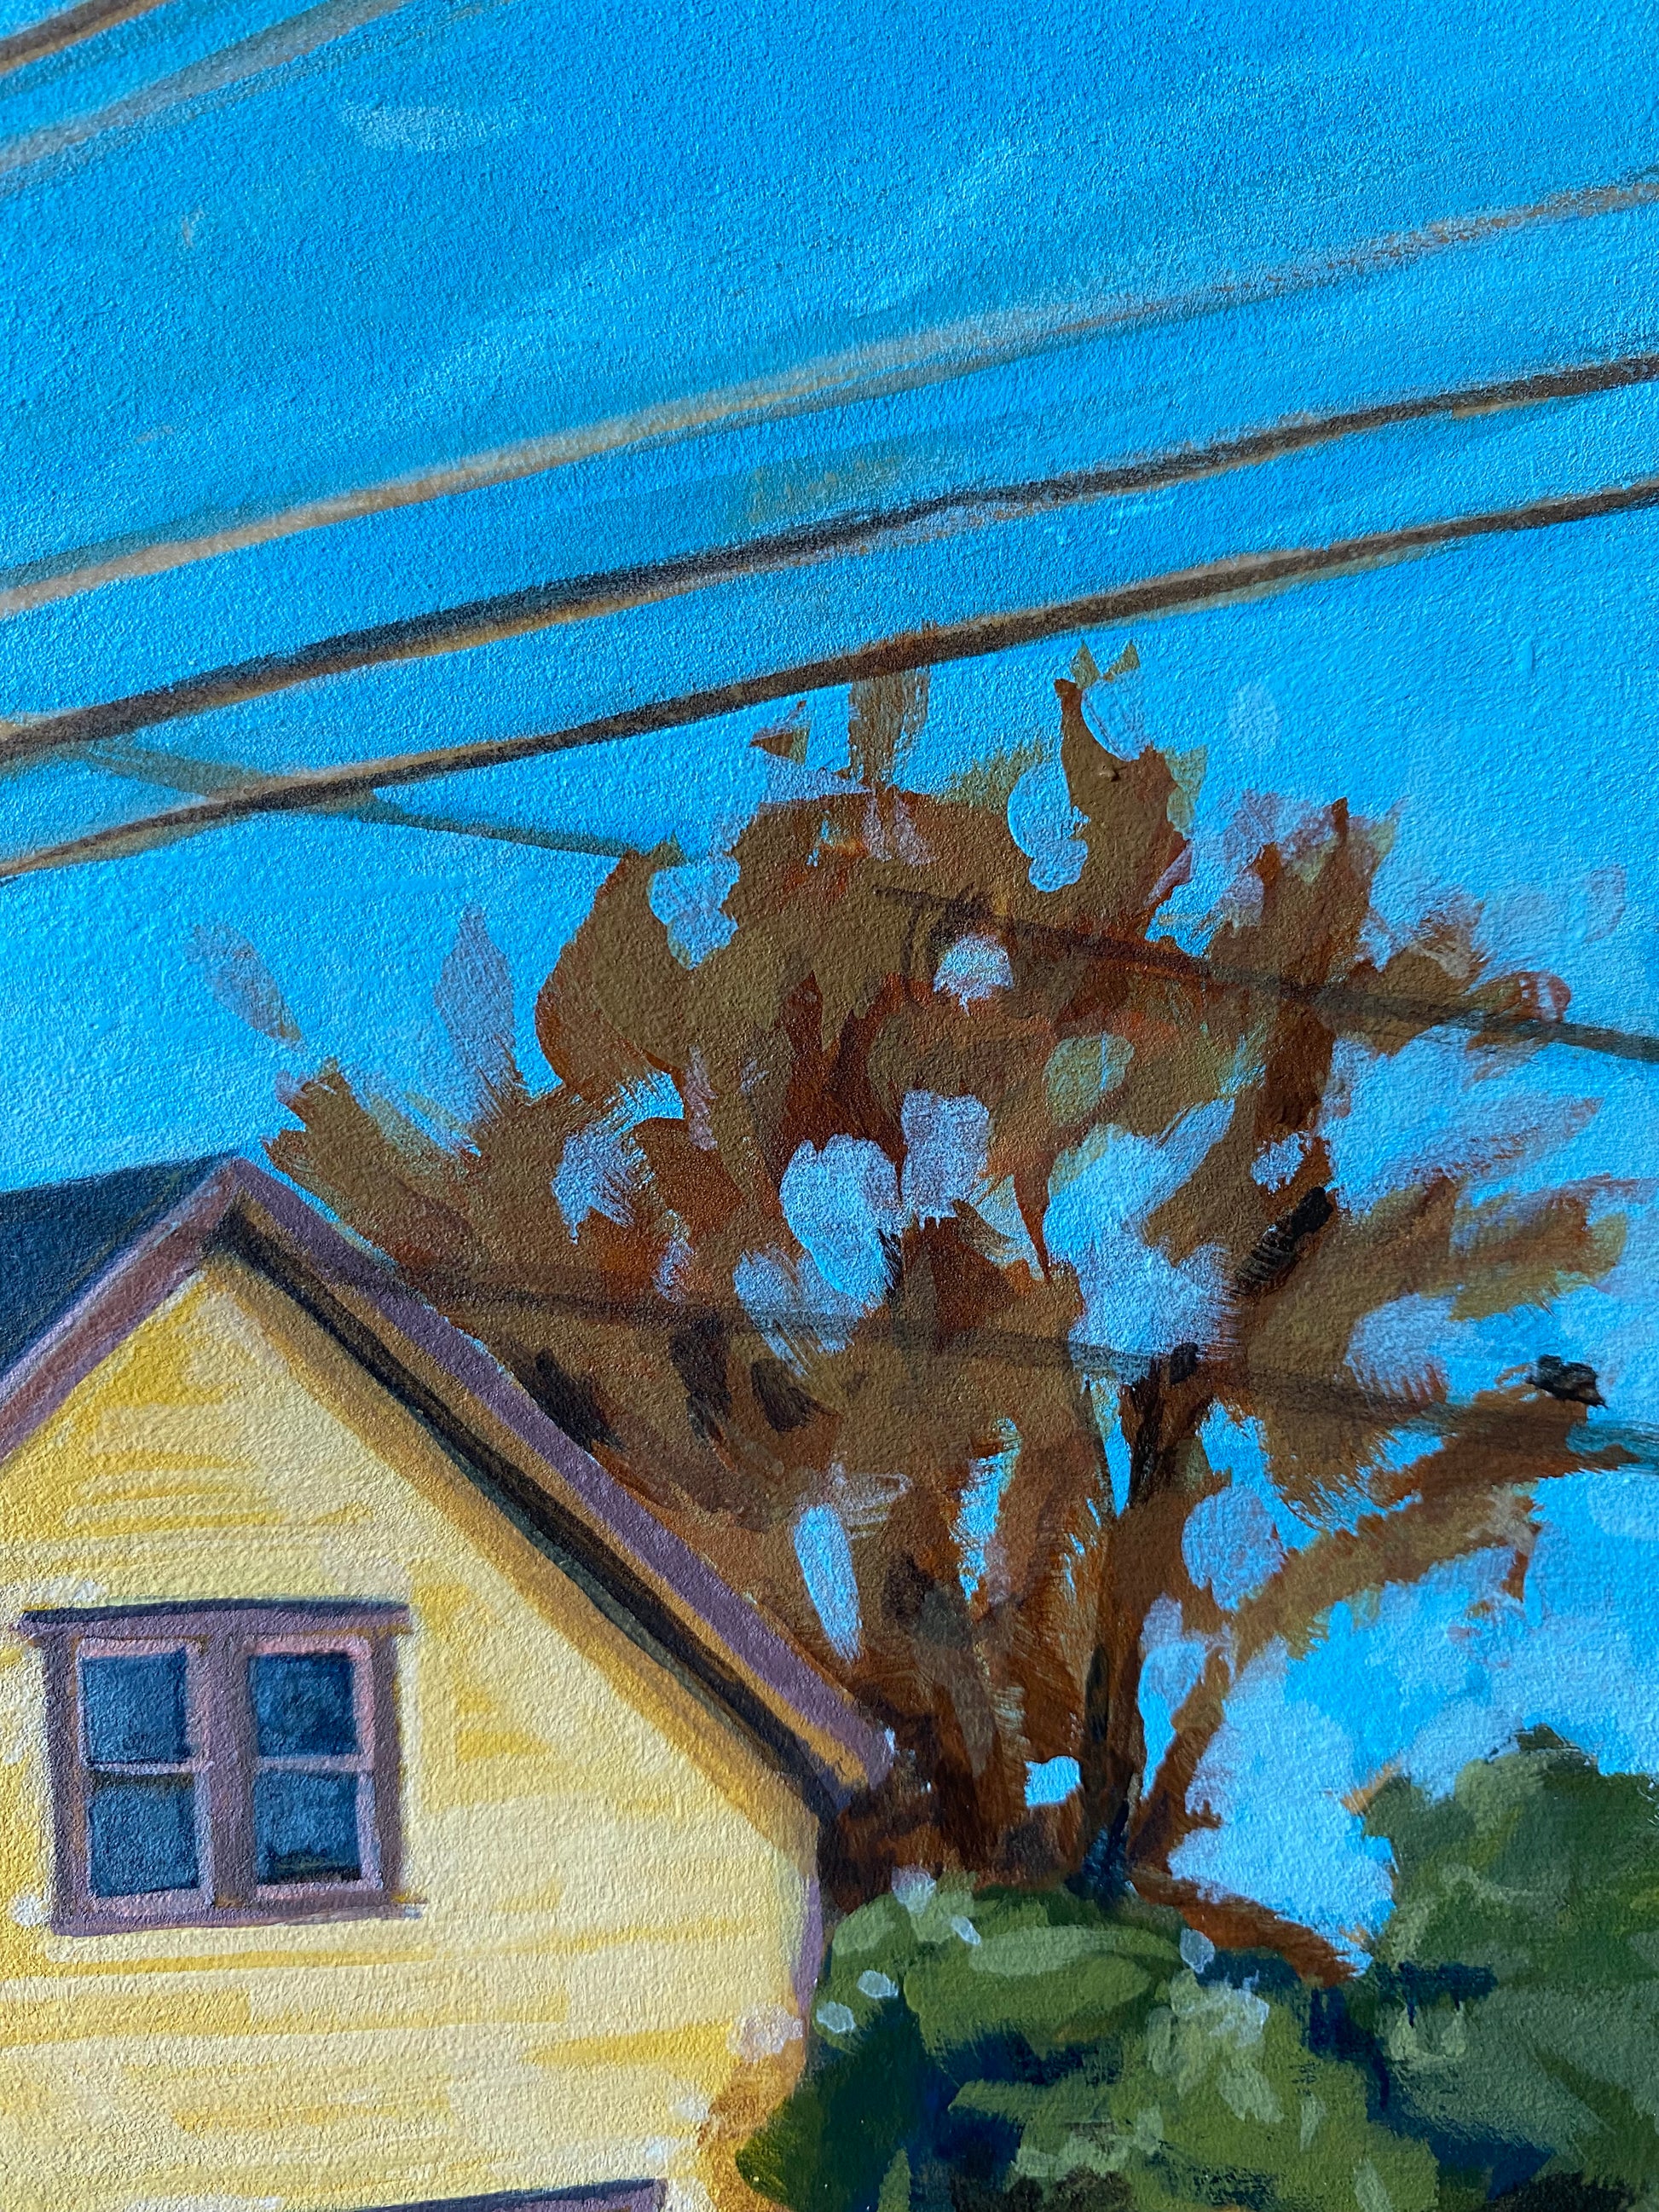 Closeup of 8x10 painting of a yellow house in a Portland neighborhood